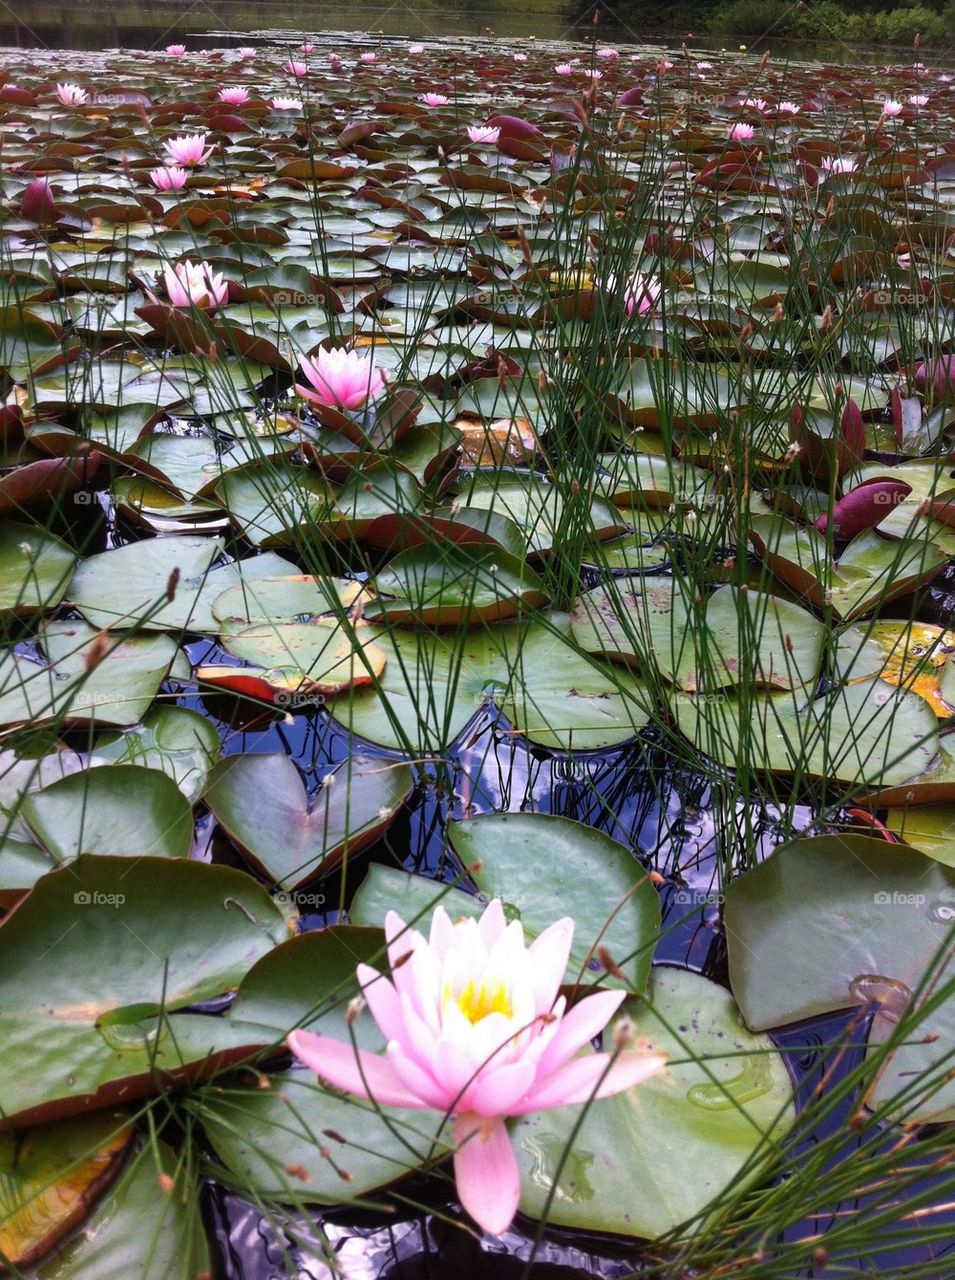 Flowering lily pads